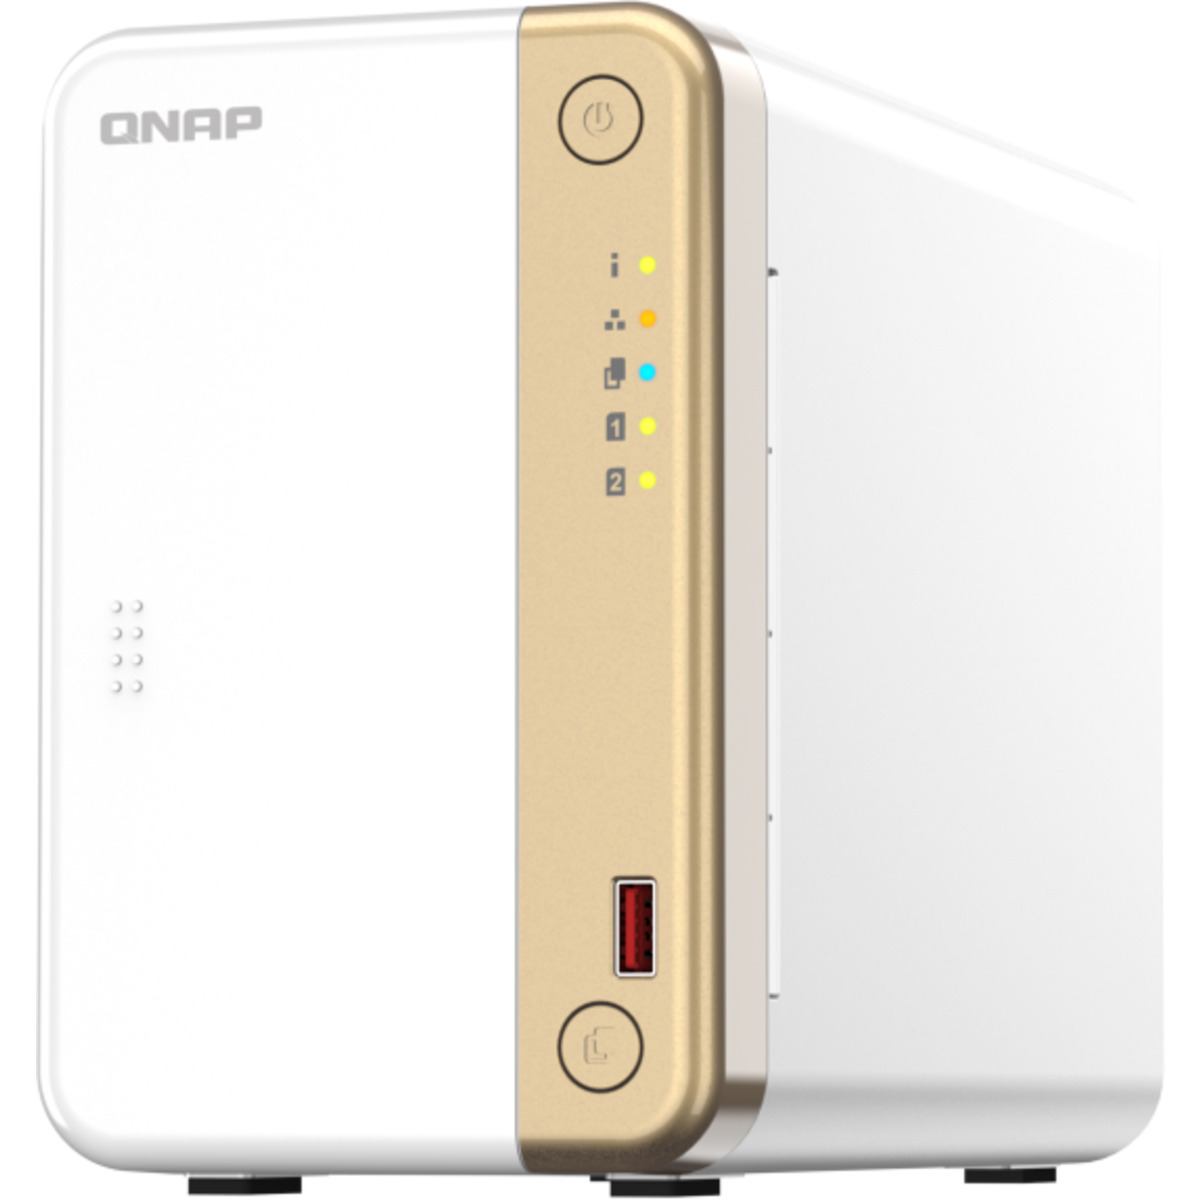 QNAP TS-262 22tb 2-Bay Desktop Personal / Basic Home / Small Office NAS - Network Attached Storage Device 1x22tb Western Digital Ultrastar HC580 SED WUH722422ALE6L1 3.5 7200rpm SATA 6Gb/s HDD ENTERPRISE Class Drives Installed - Burn-In Tested TS-262